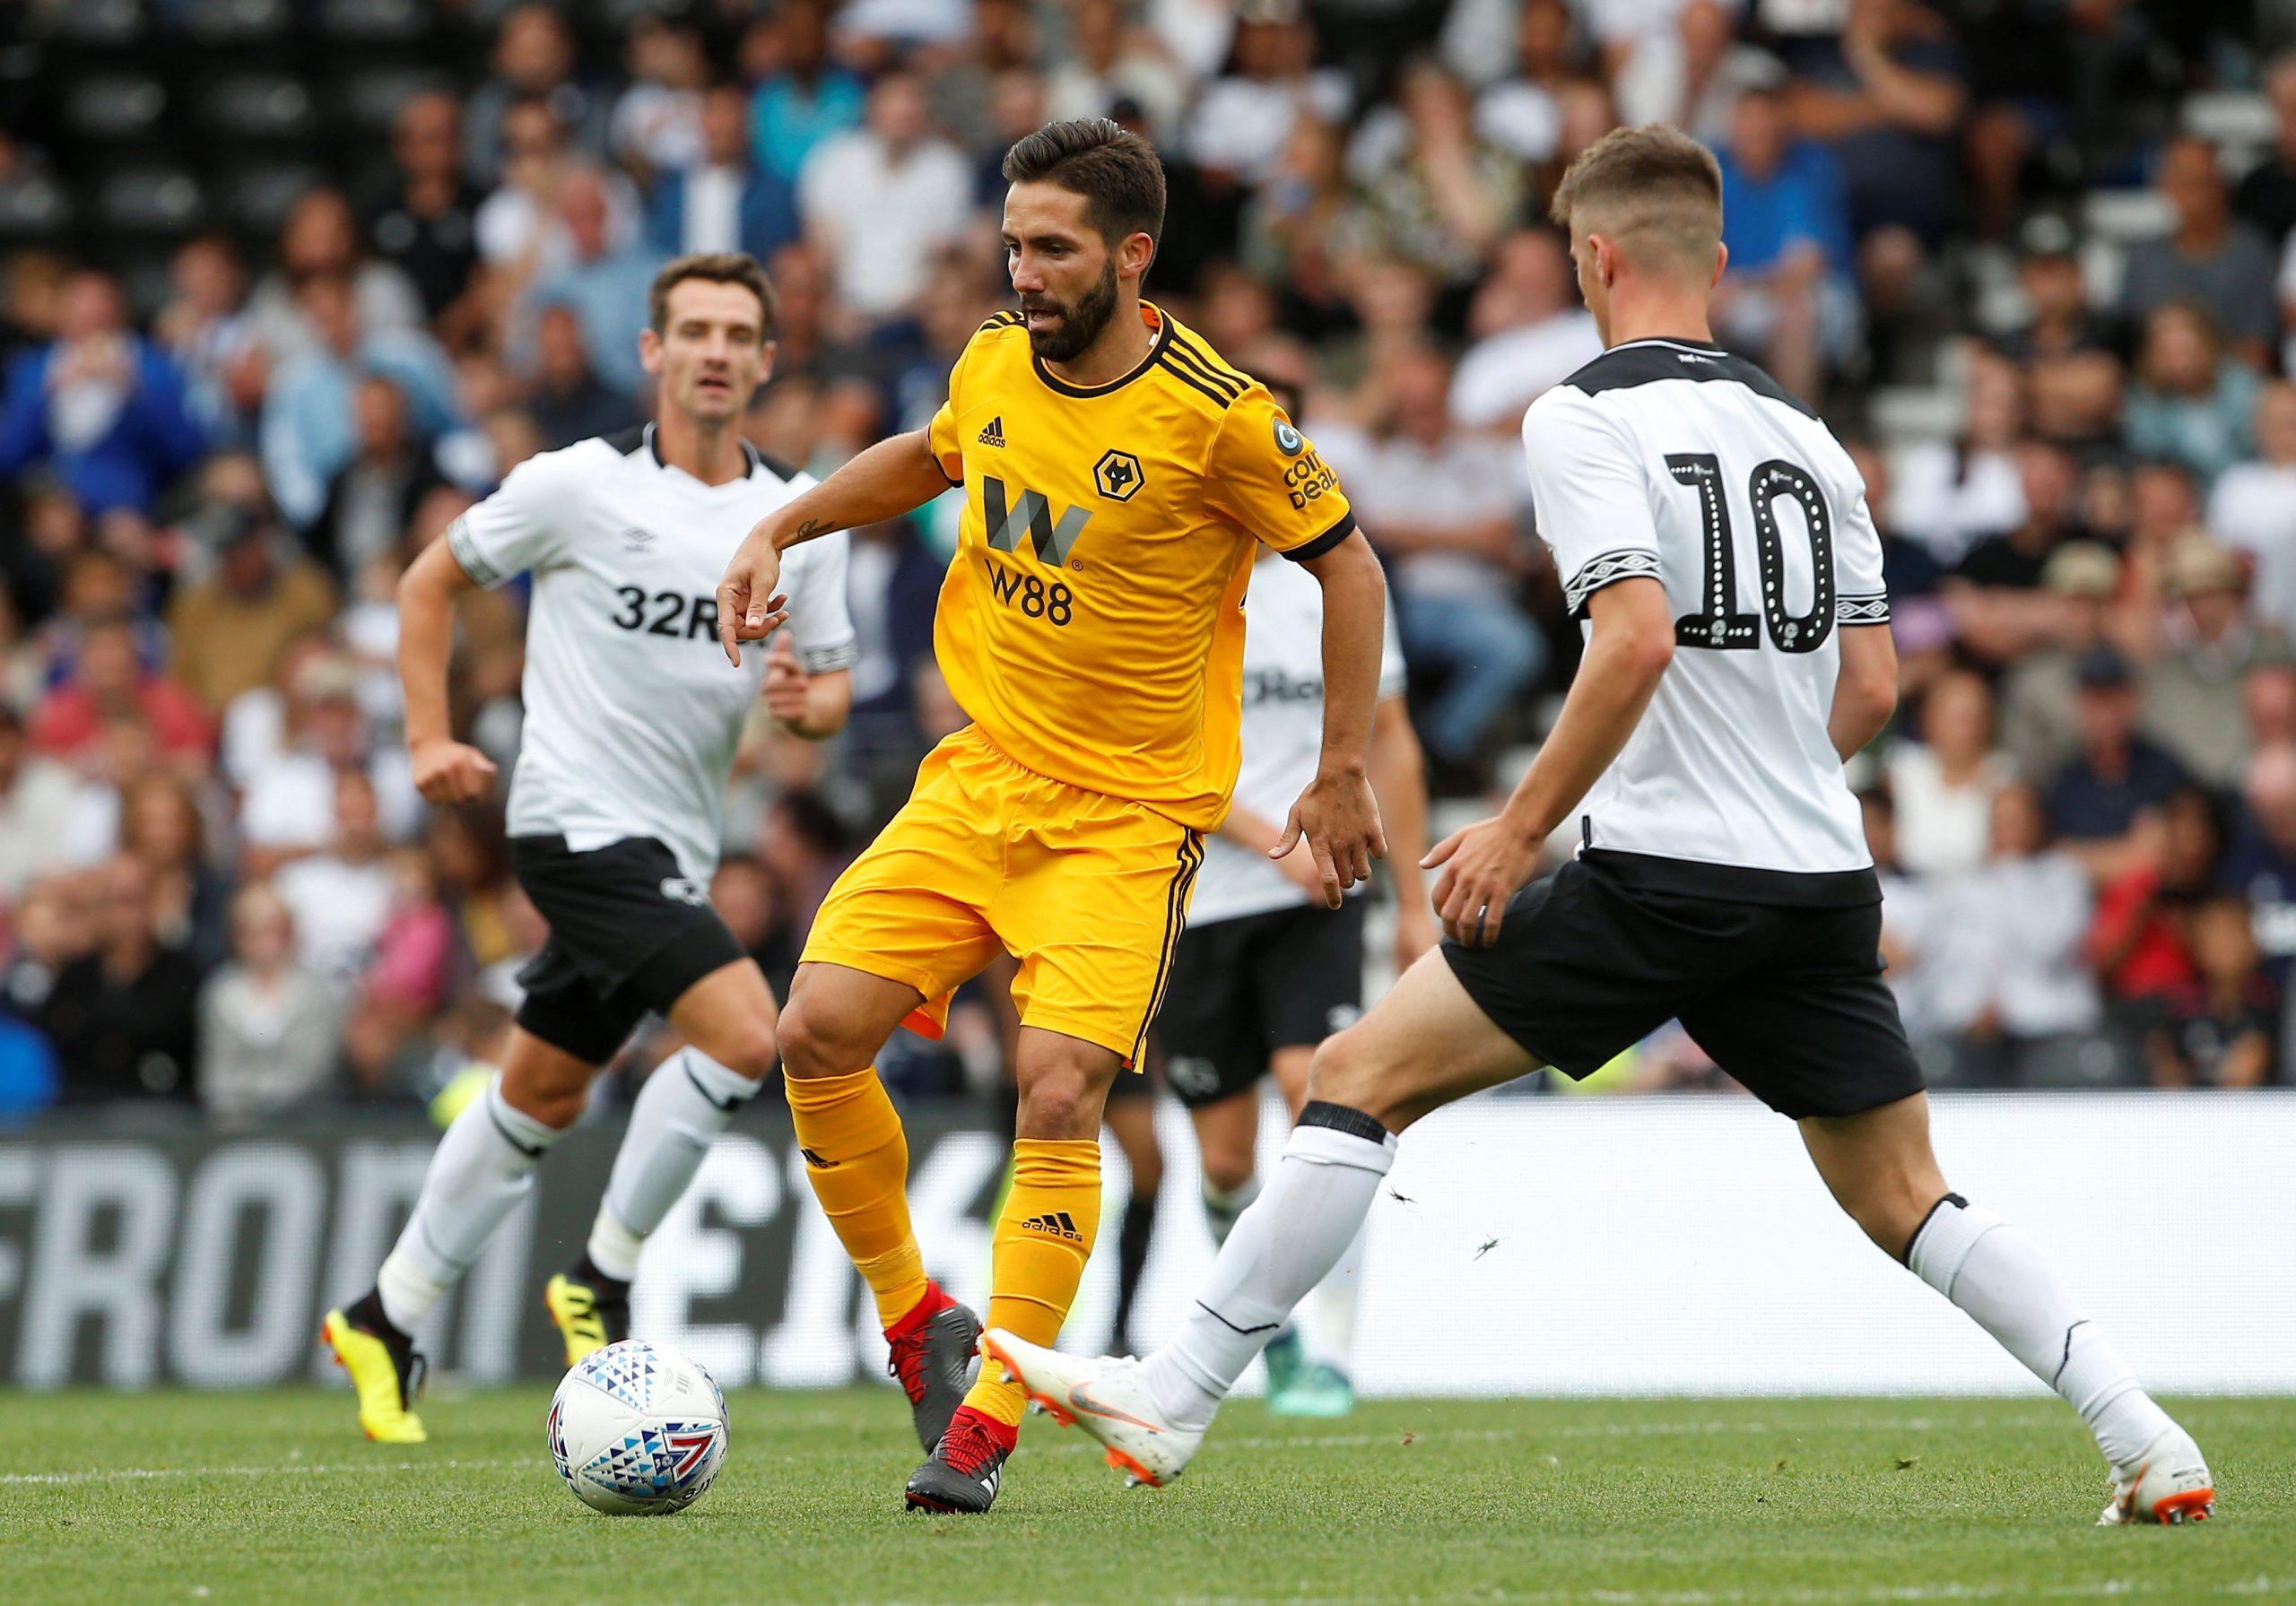 Soccer Football - Pre Season Friendly - Derby County v Wolverhampton Wanderers - Pride Park, Derby, Britain - July 28, 2018   Wolves' Joao Moutinho in action    Action Images via Reuters/Craig Brough